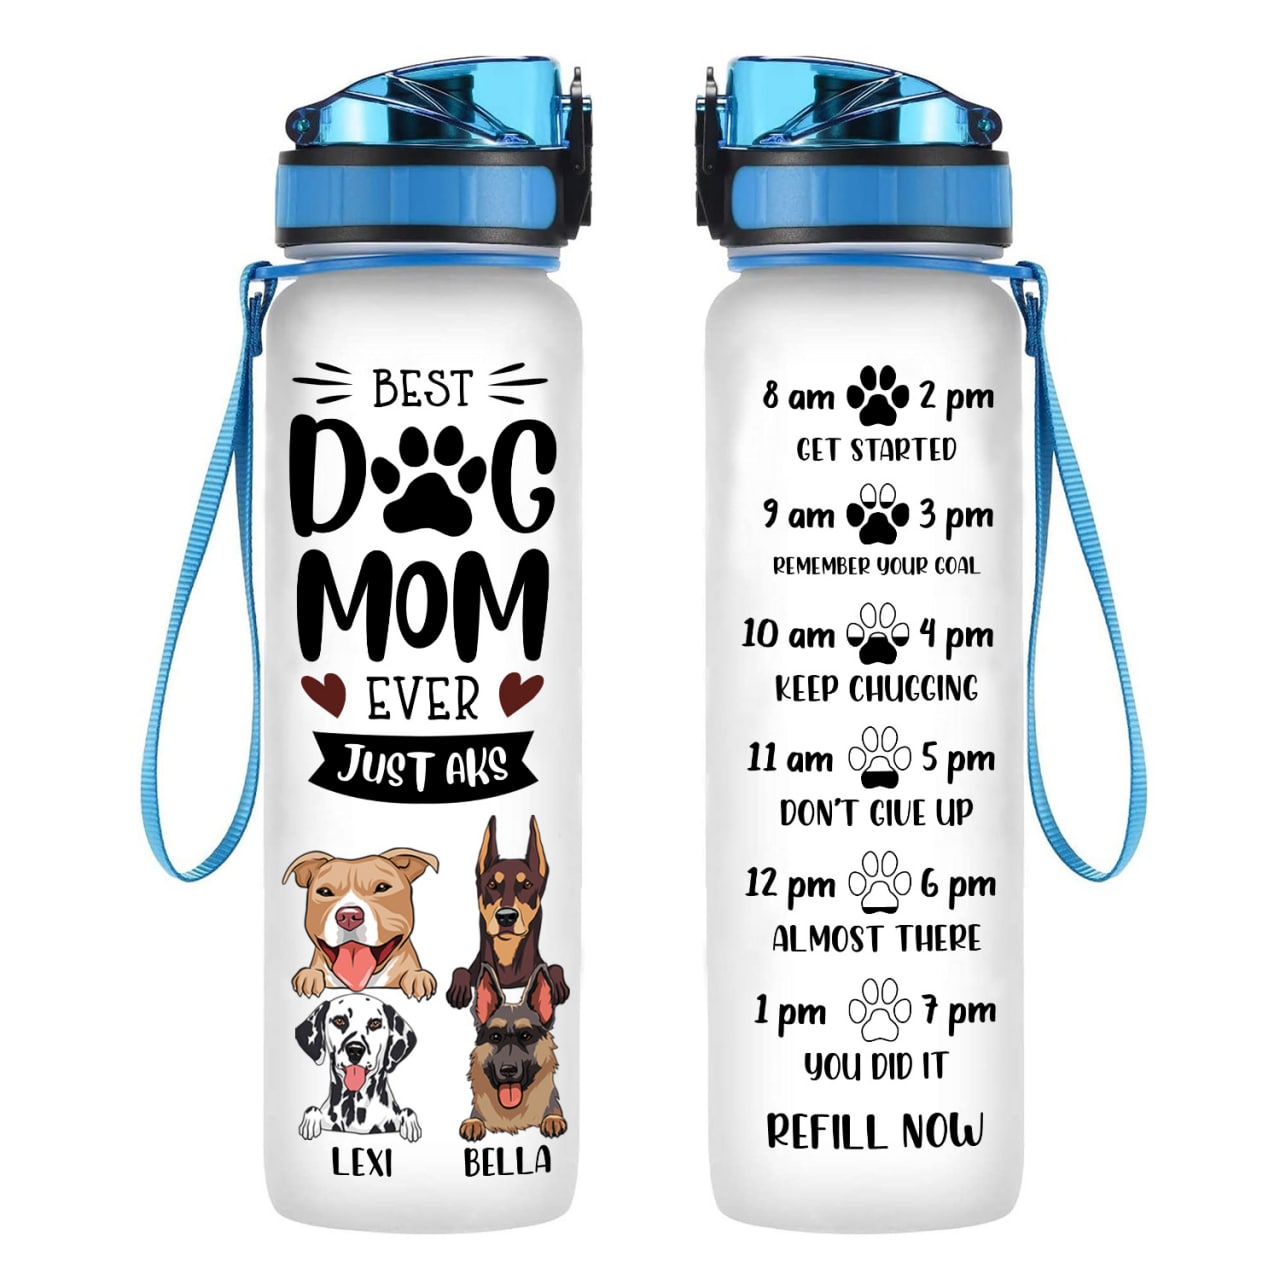 Best Dog Mom Ever Just Ask - Personalized Water Tracker Bottle - Gift For Dog Mom